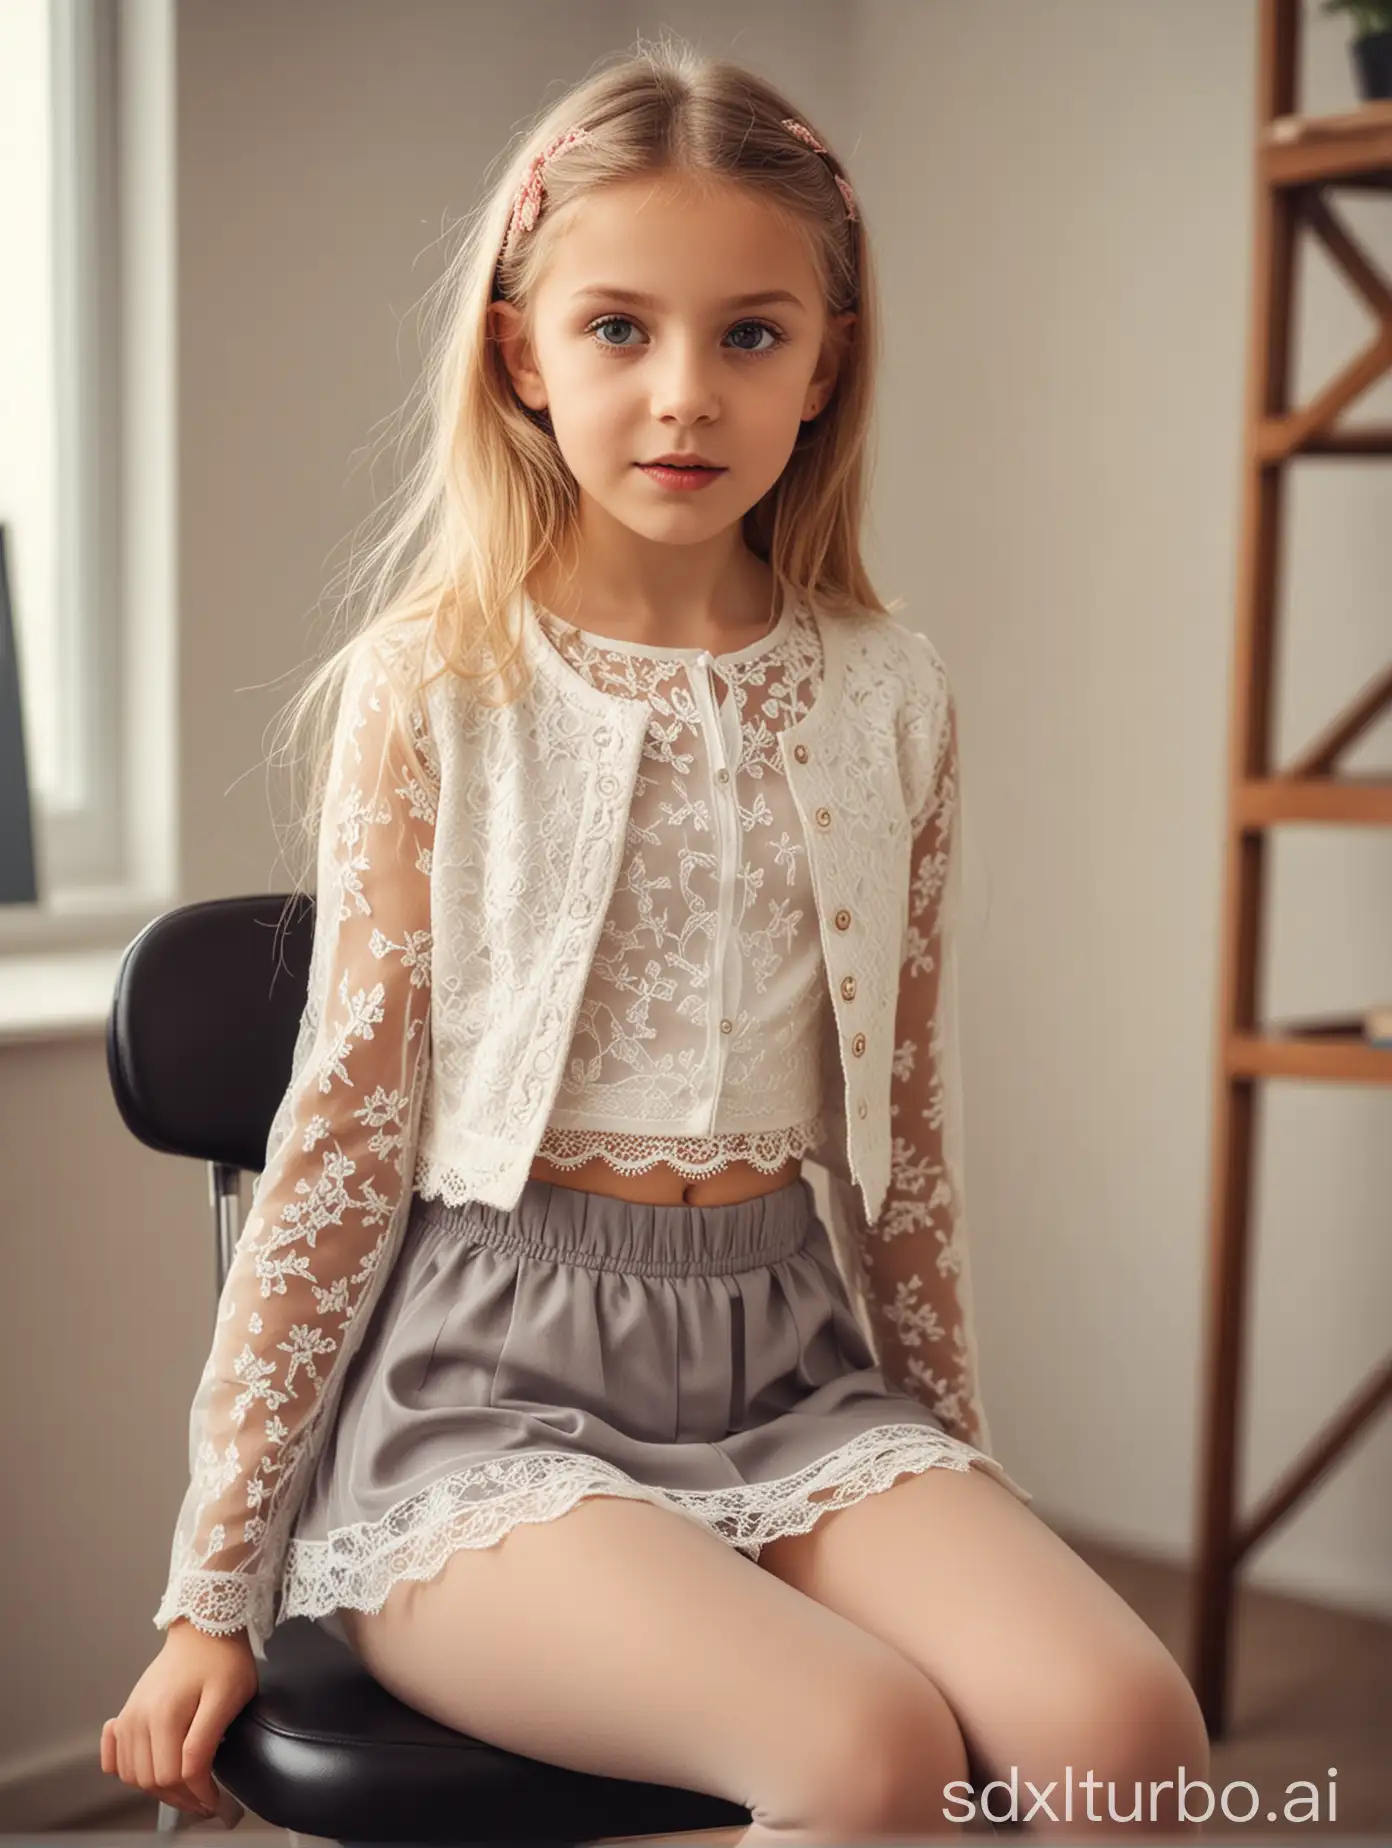 7 year old girl, lace crop top, open jacket, mini skirt, sheer plain glossy tights, sitting in the office, soft focus